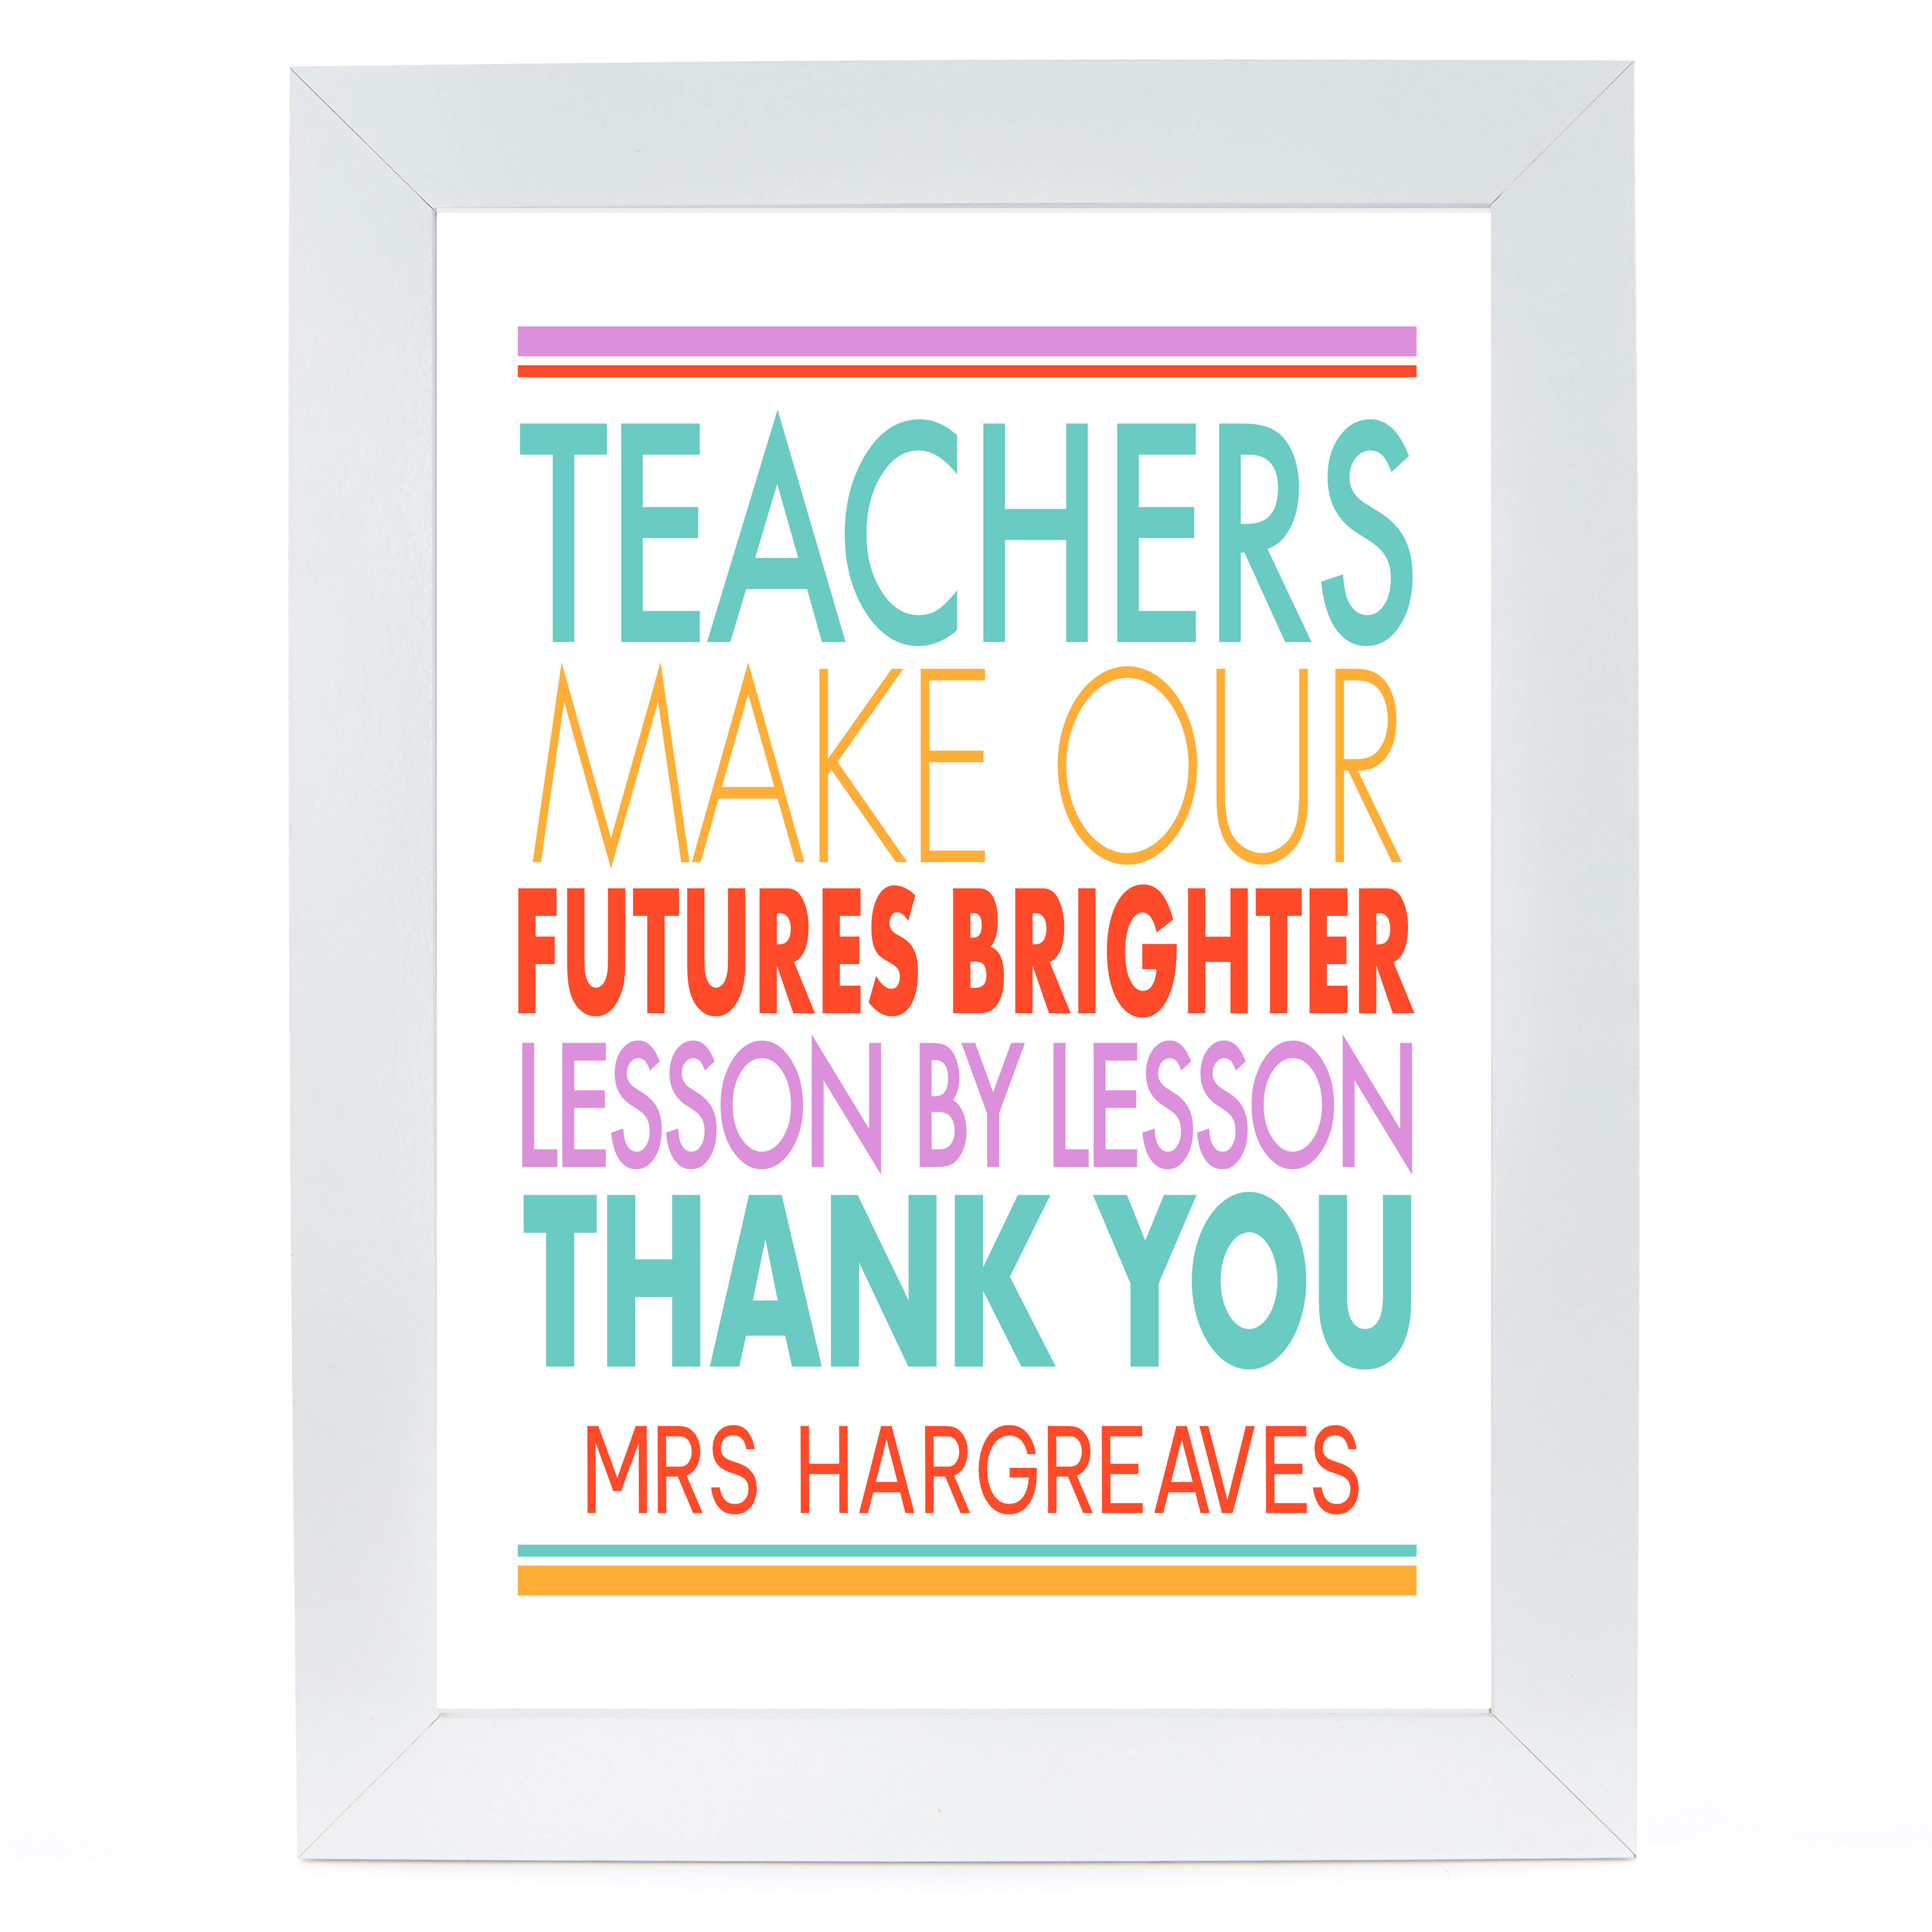 Personalised A3 Print - Teachers Make Our Futures Brighter